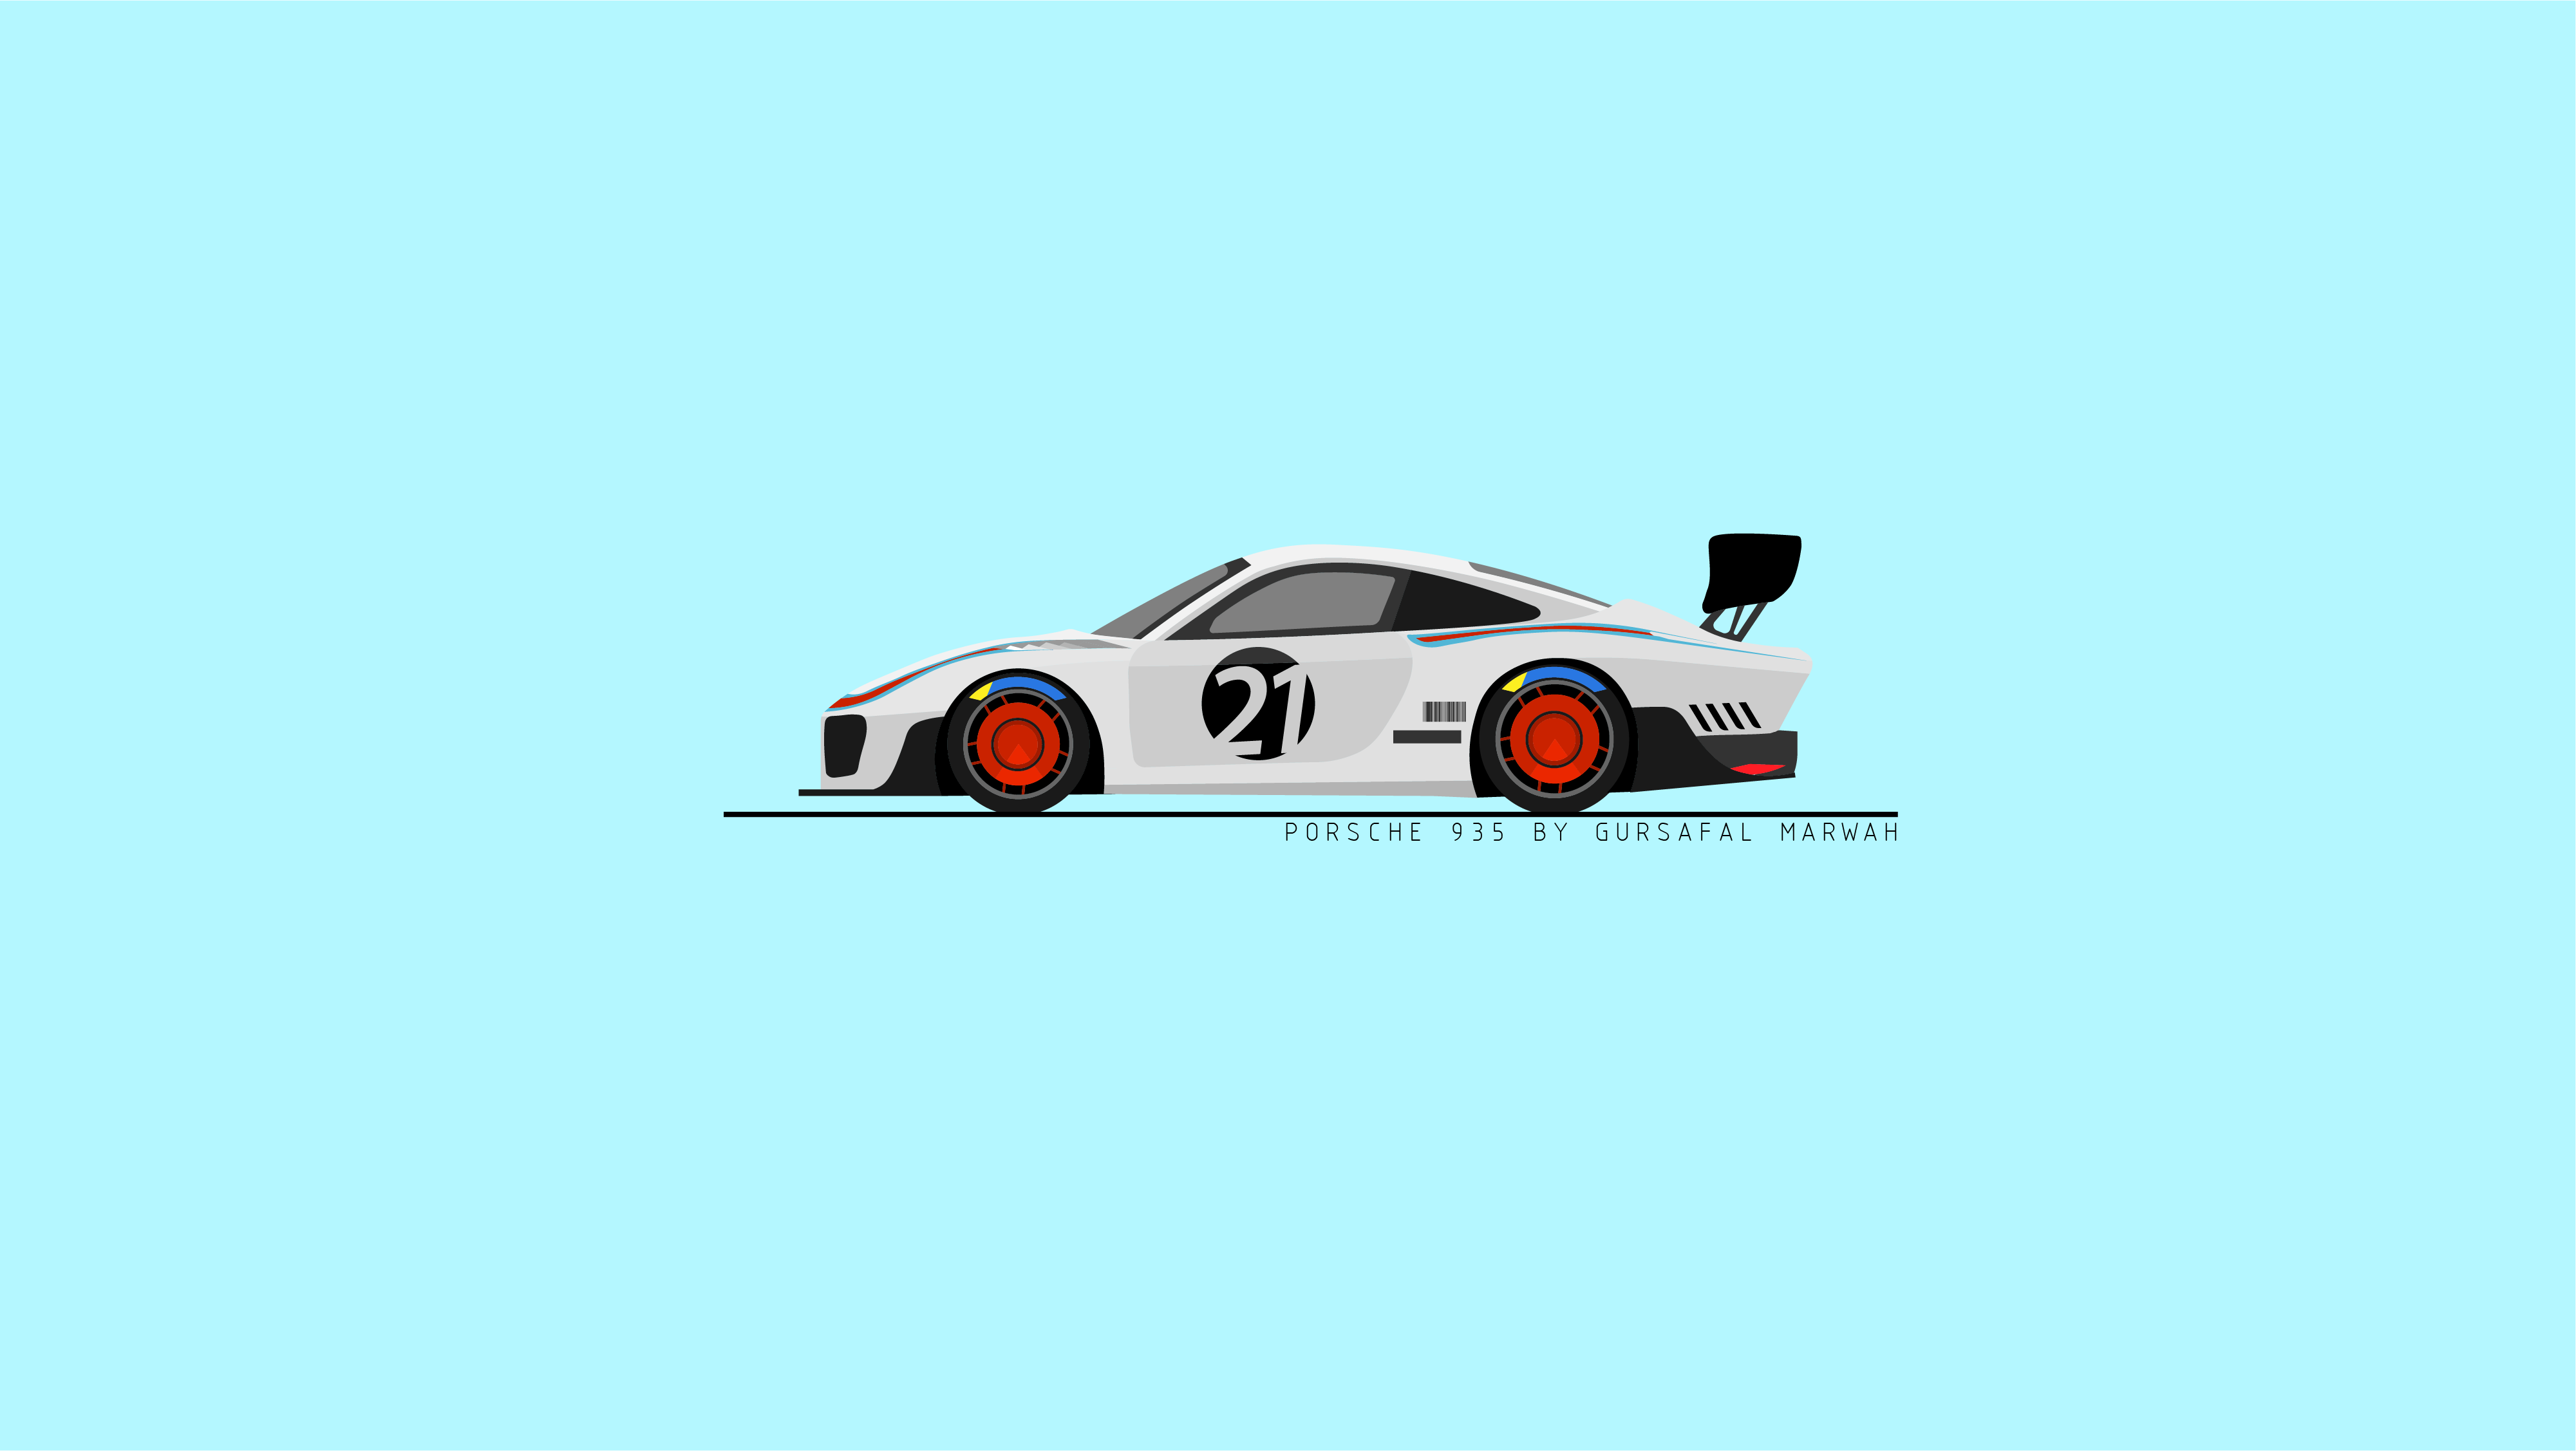 Porsche 4K wallpaper for your desktop or mobile screen free and easy to download